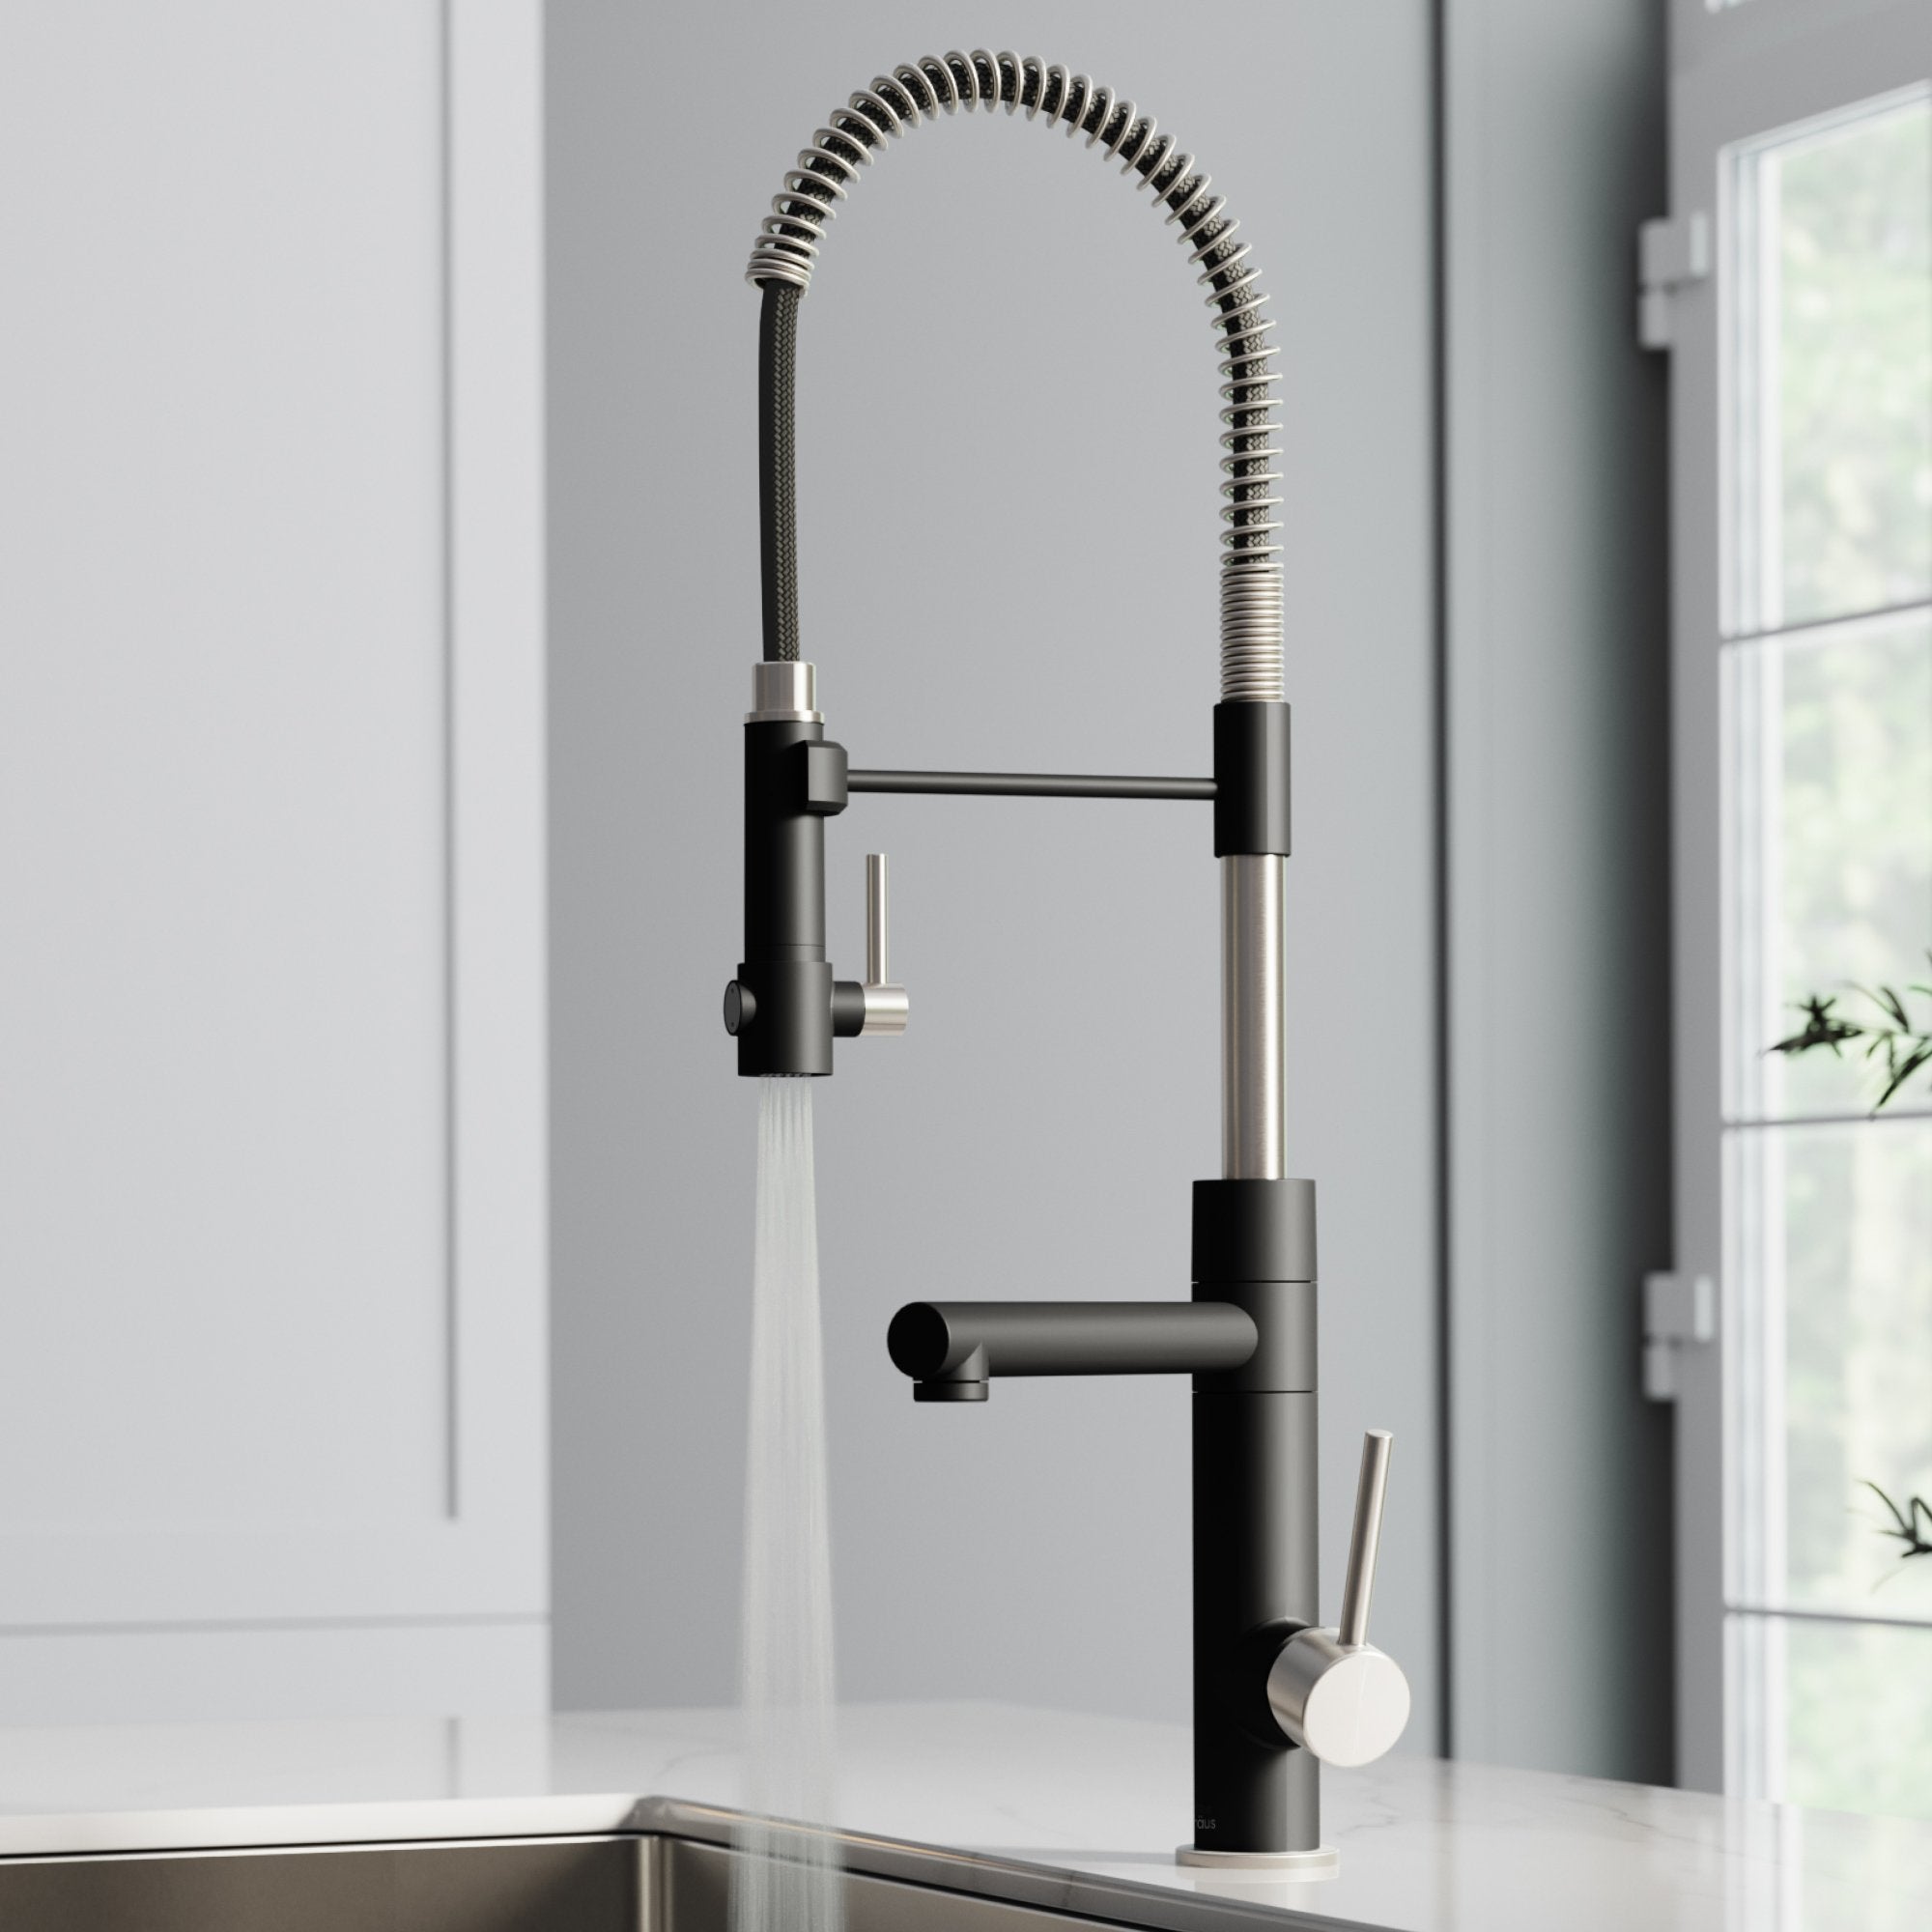 KRAUS Artec Pro 2-Function Commercial Style Pre-Rinse Kitchen Faucet with Soap Dispenser in Spot Free Stainless Steel/Matte Black KPF-1603SFSMB-KSD-32MB | DirectSinks